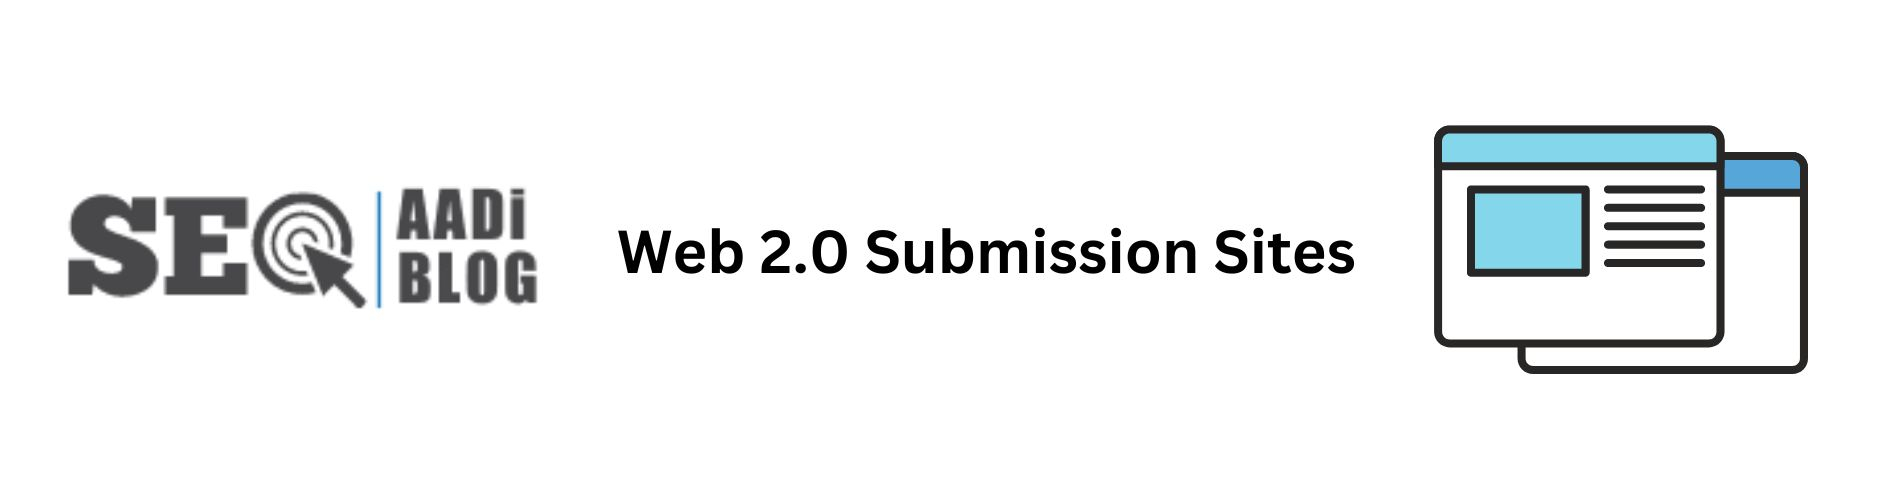 web 2.0 submission sites